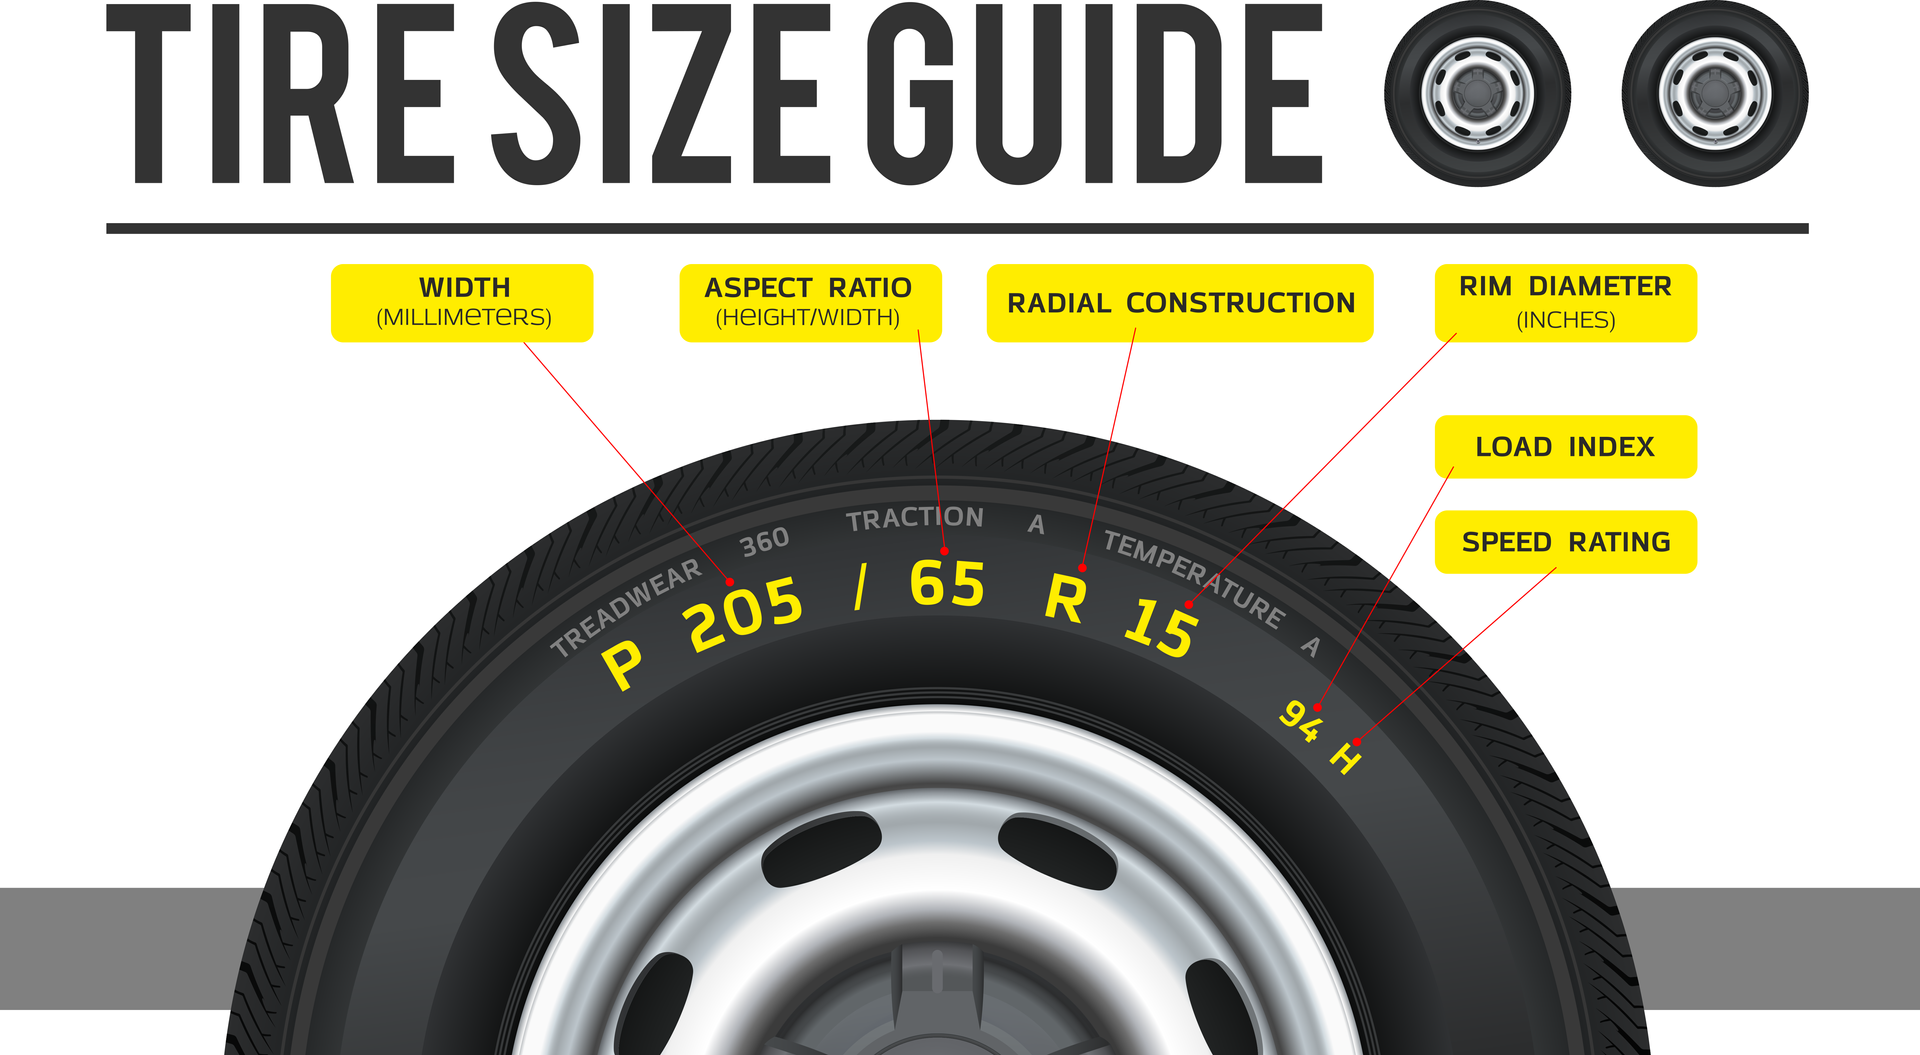 Tire Size Guide at Auto Go in Branson West, MO